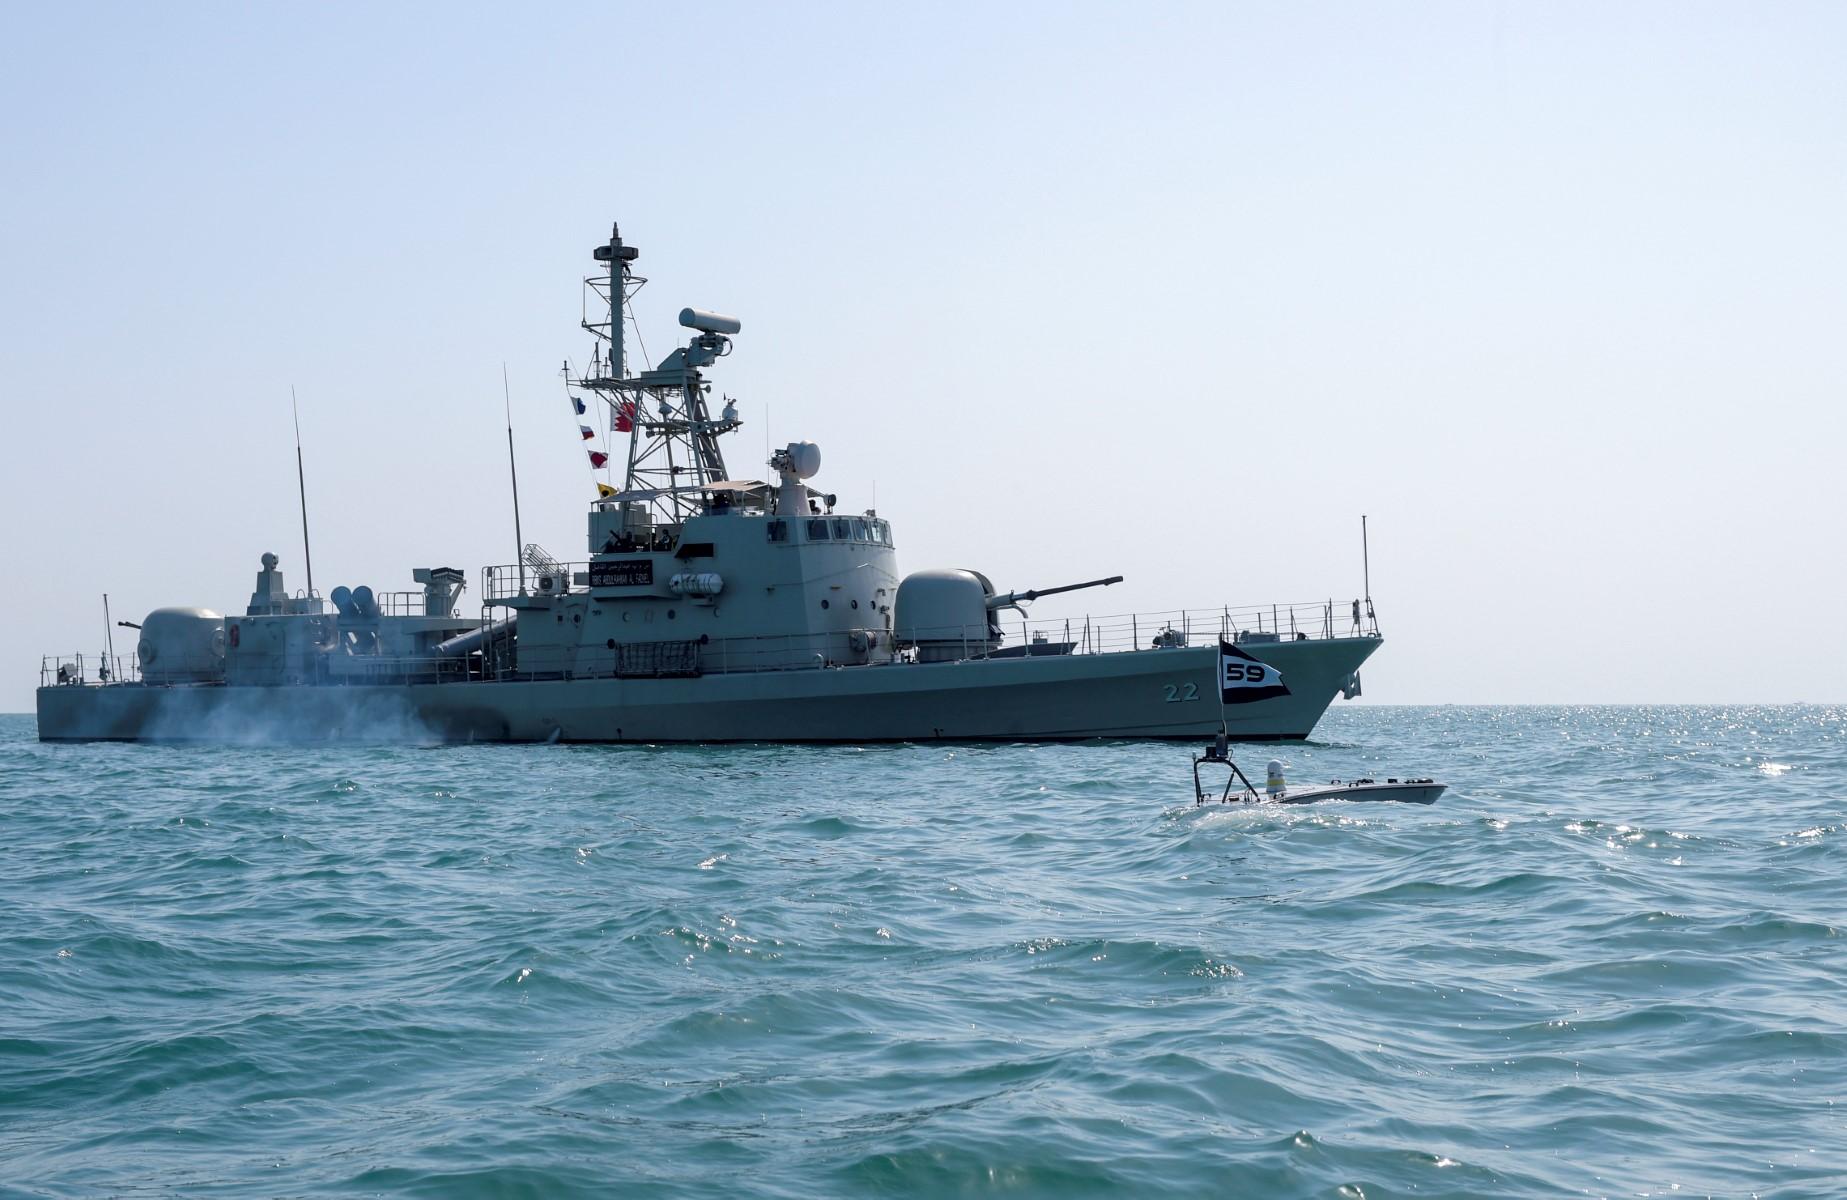 A Man-Portable Tactical Autonomous Systems T-12 unmanned surface vessel sails alongside Royal Bahrain Naval Force Abdulrahman Al Fadhel in the Gulf waters during a joint naval exercise between US 5th Fleet Command and Bahraini forces, on Oct 26. Photo: AFP